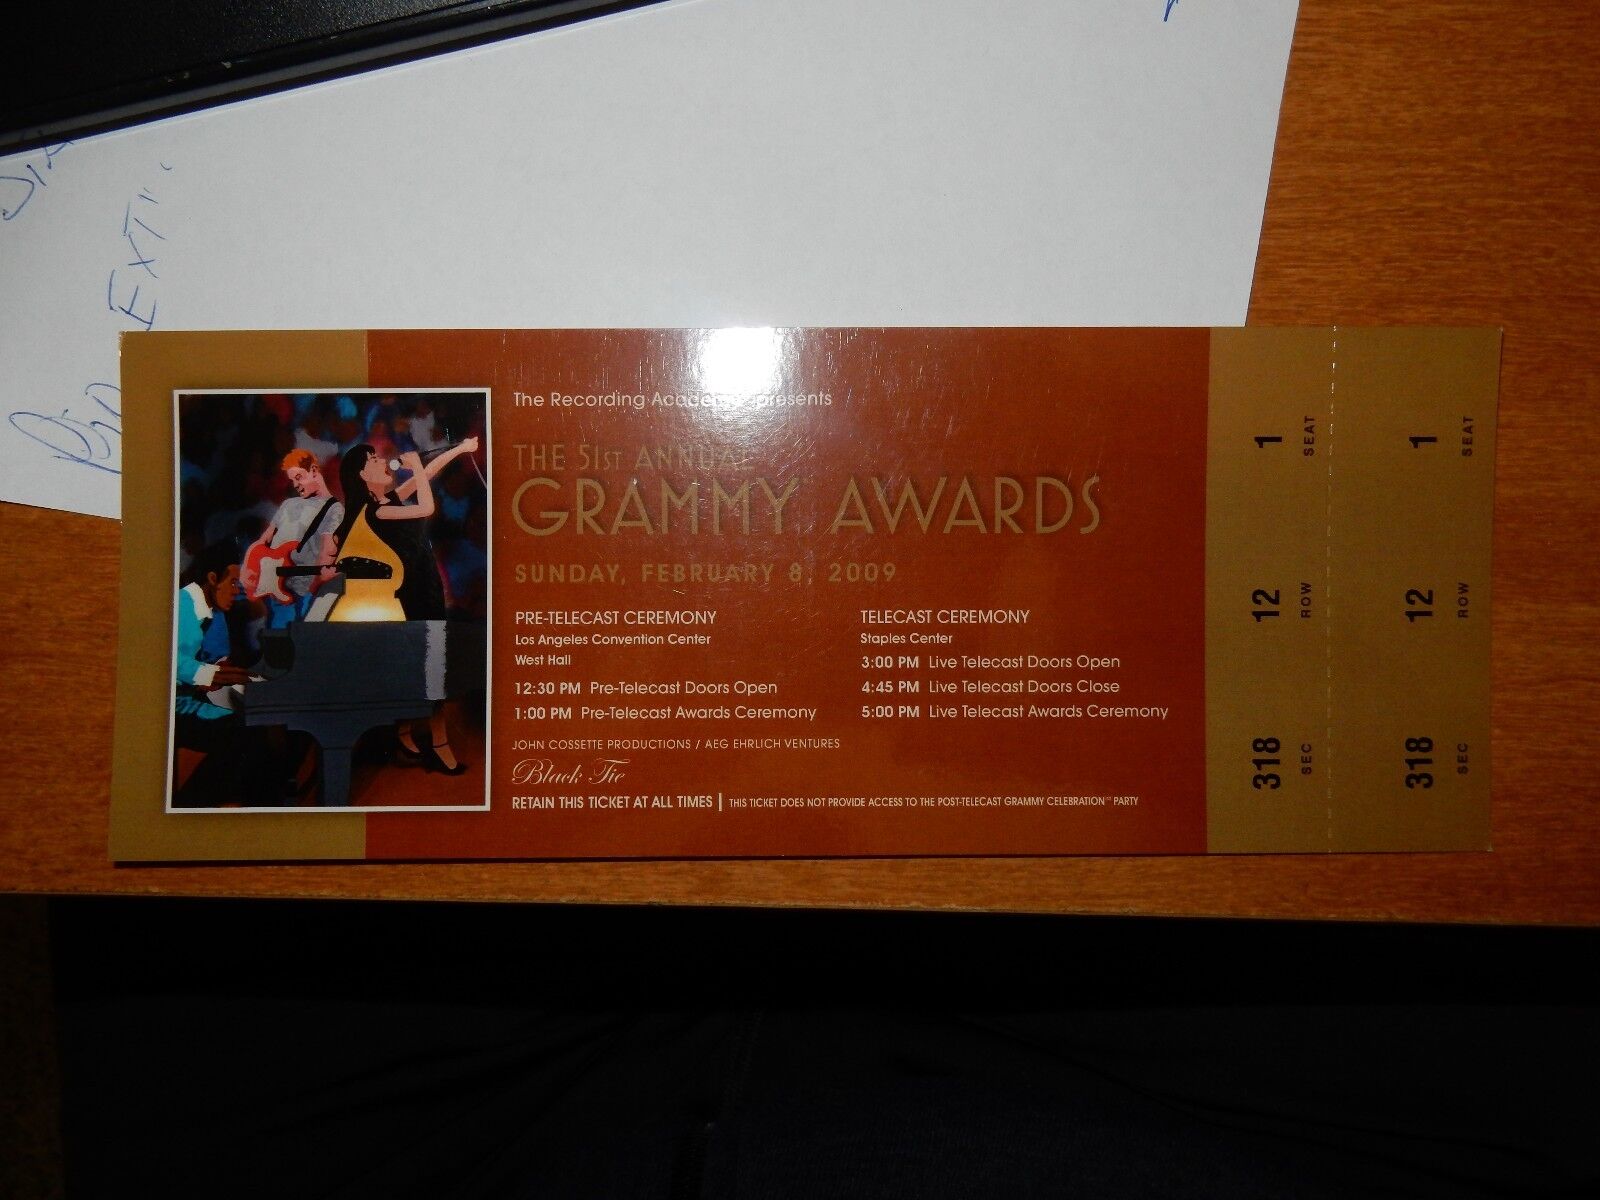 Grammy Lowest price challenge Awards Unused Ticket Super Special SALE held from 51st 2009 Annual the